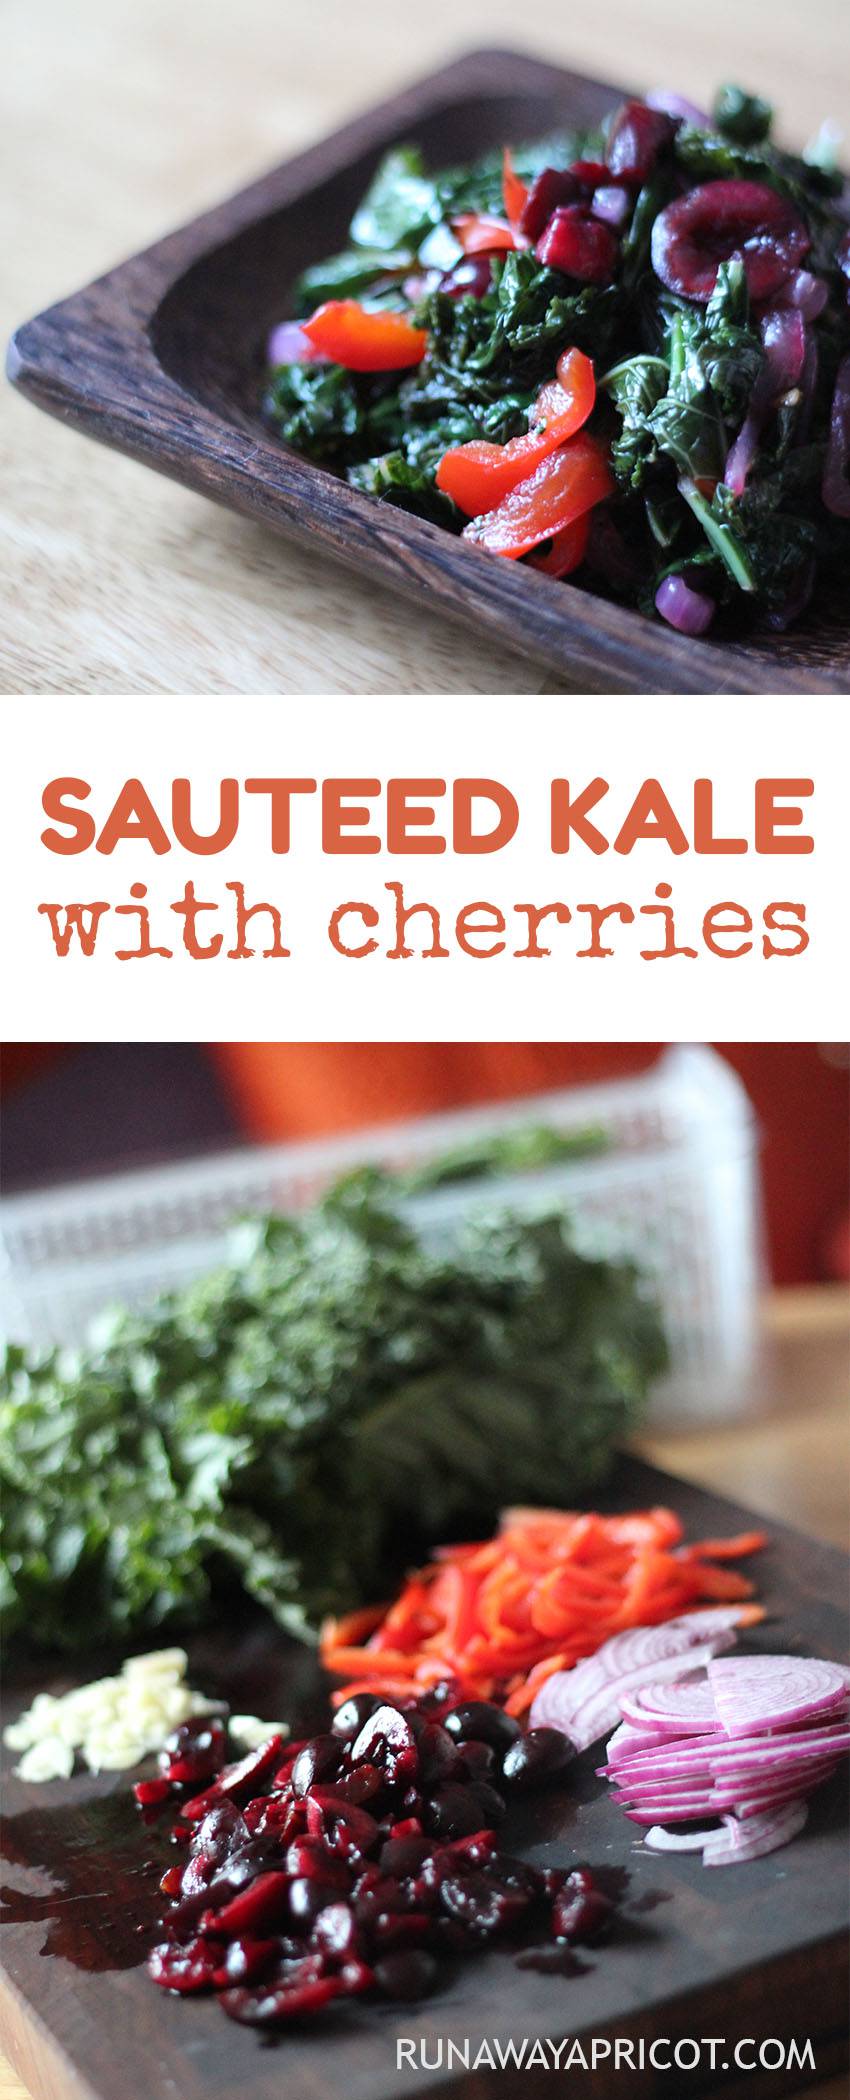 Sauteed Kale with Cherries. Make this quick side dish for a burst of color and nutrition at any meal. Reheat easily for #mealprep!